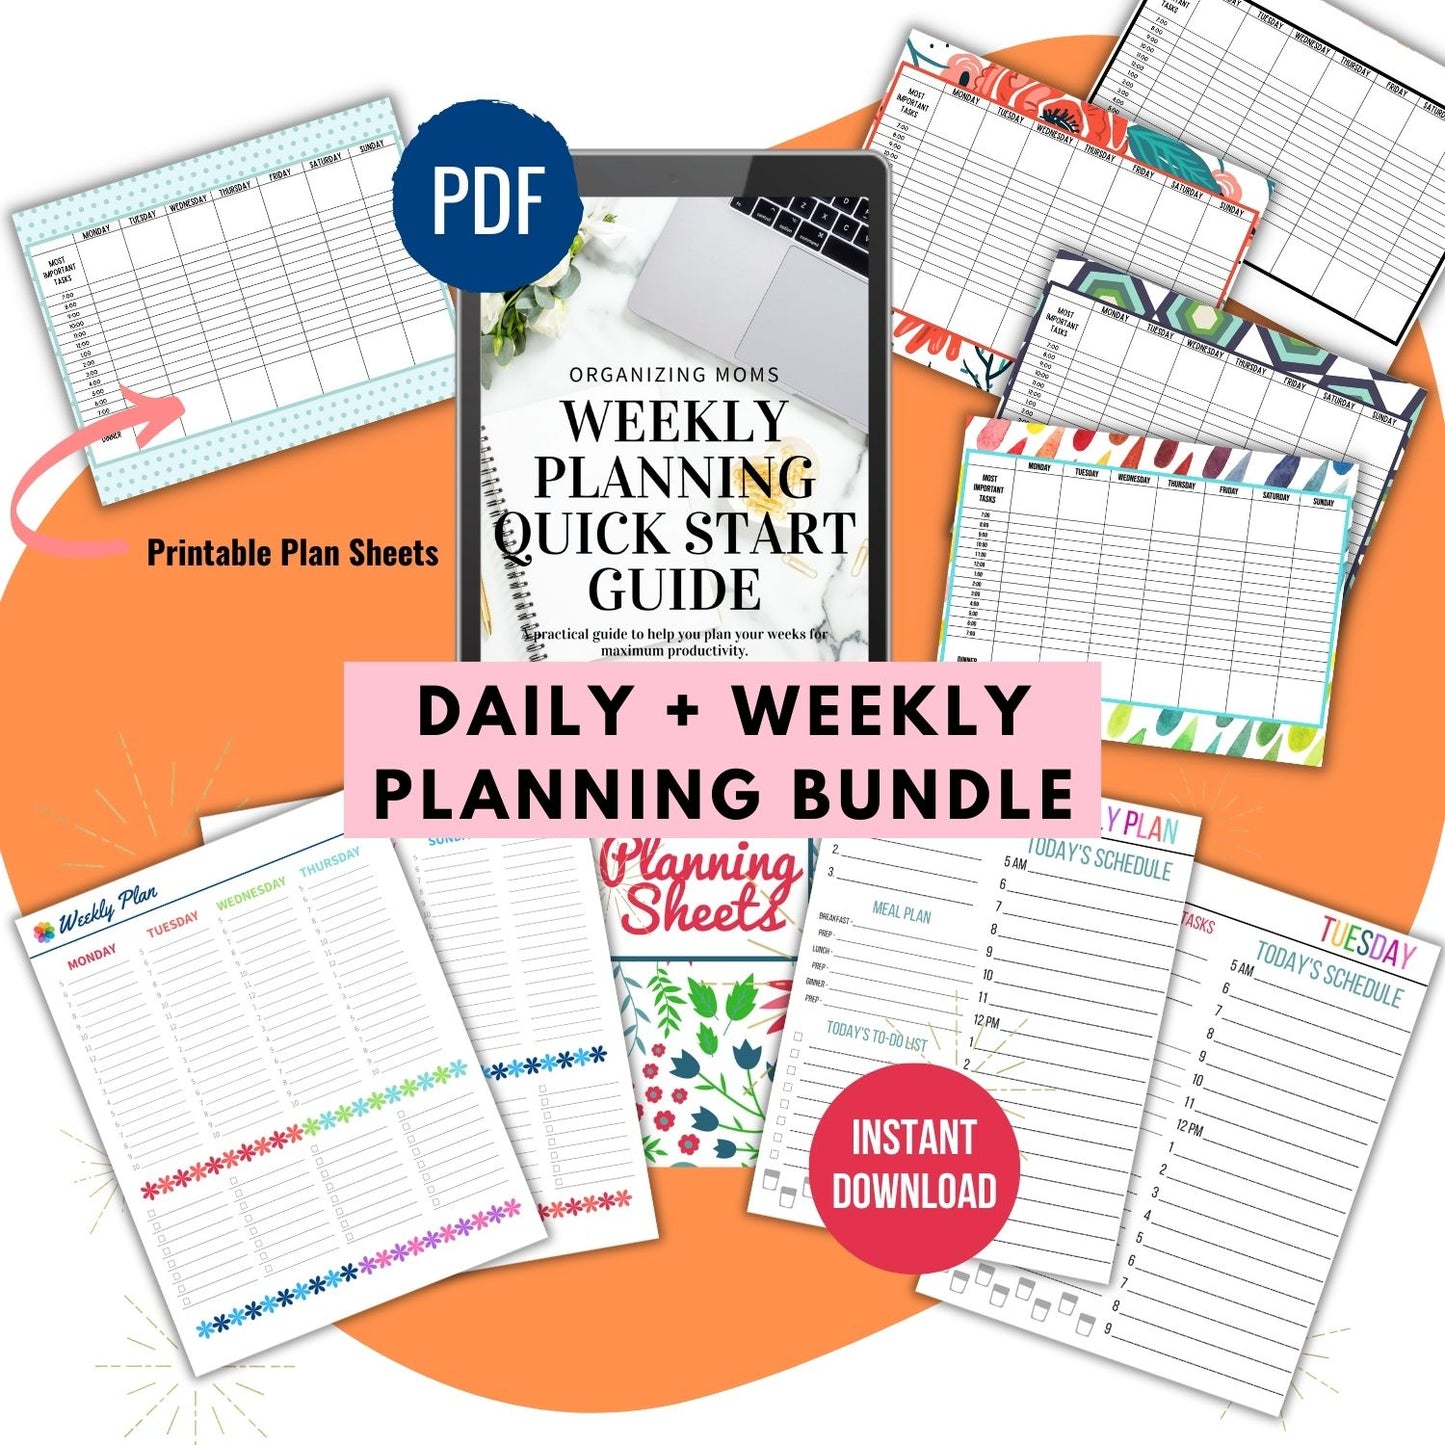 Mockup of Daily and Weekly Planning Bundle printables and Weekly Planning Quickstart Guide. PDF, Instant Download.